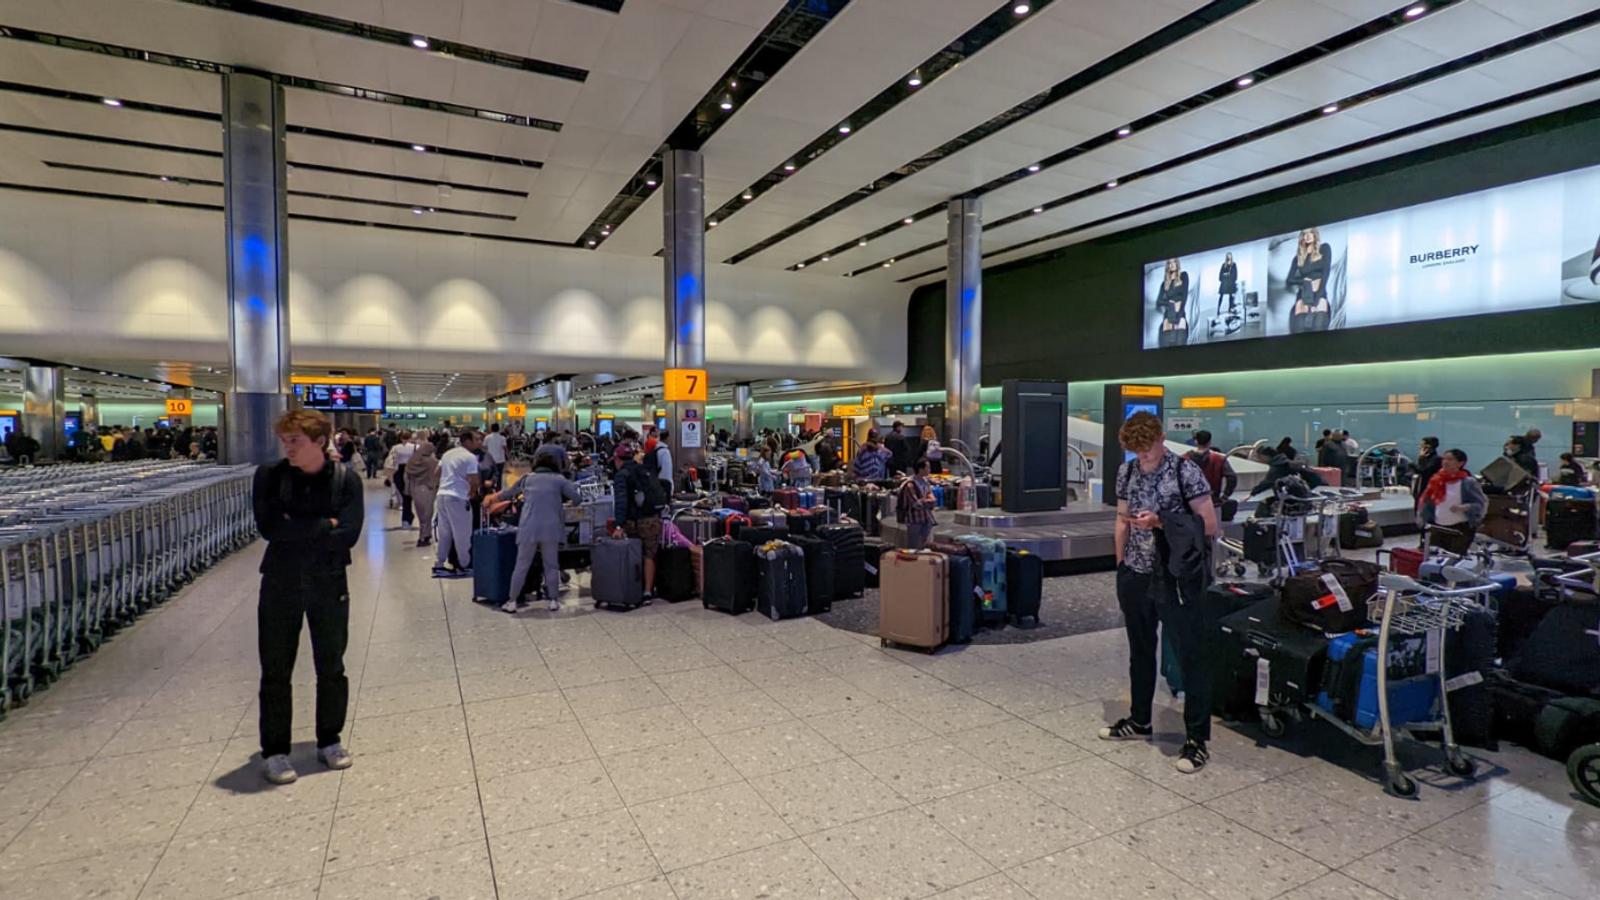 Hundreds of passengers left waiting for luggage at Heathrow amid staff shortages - 'Nobody knows what's going on'